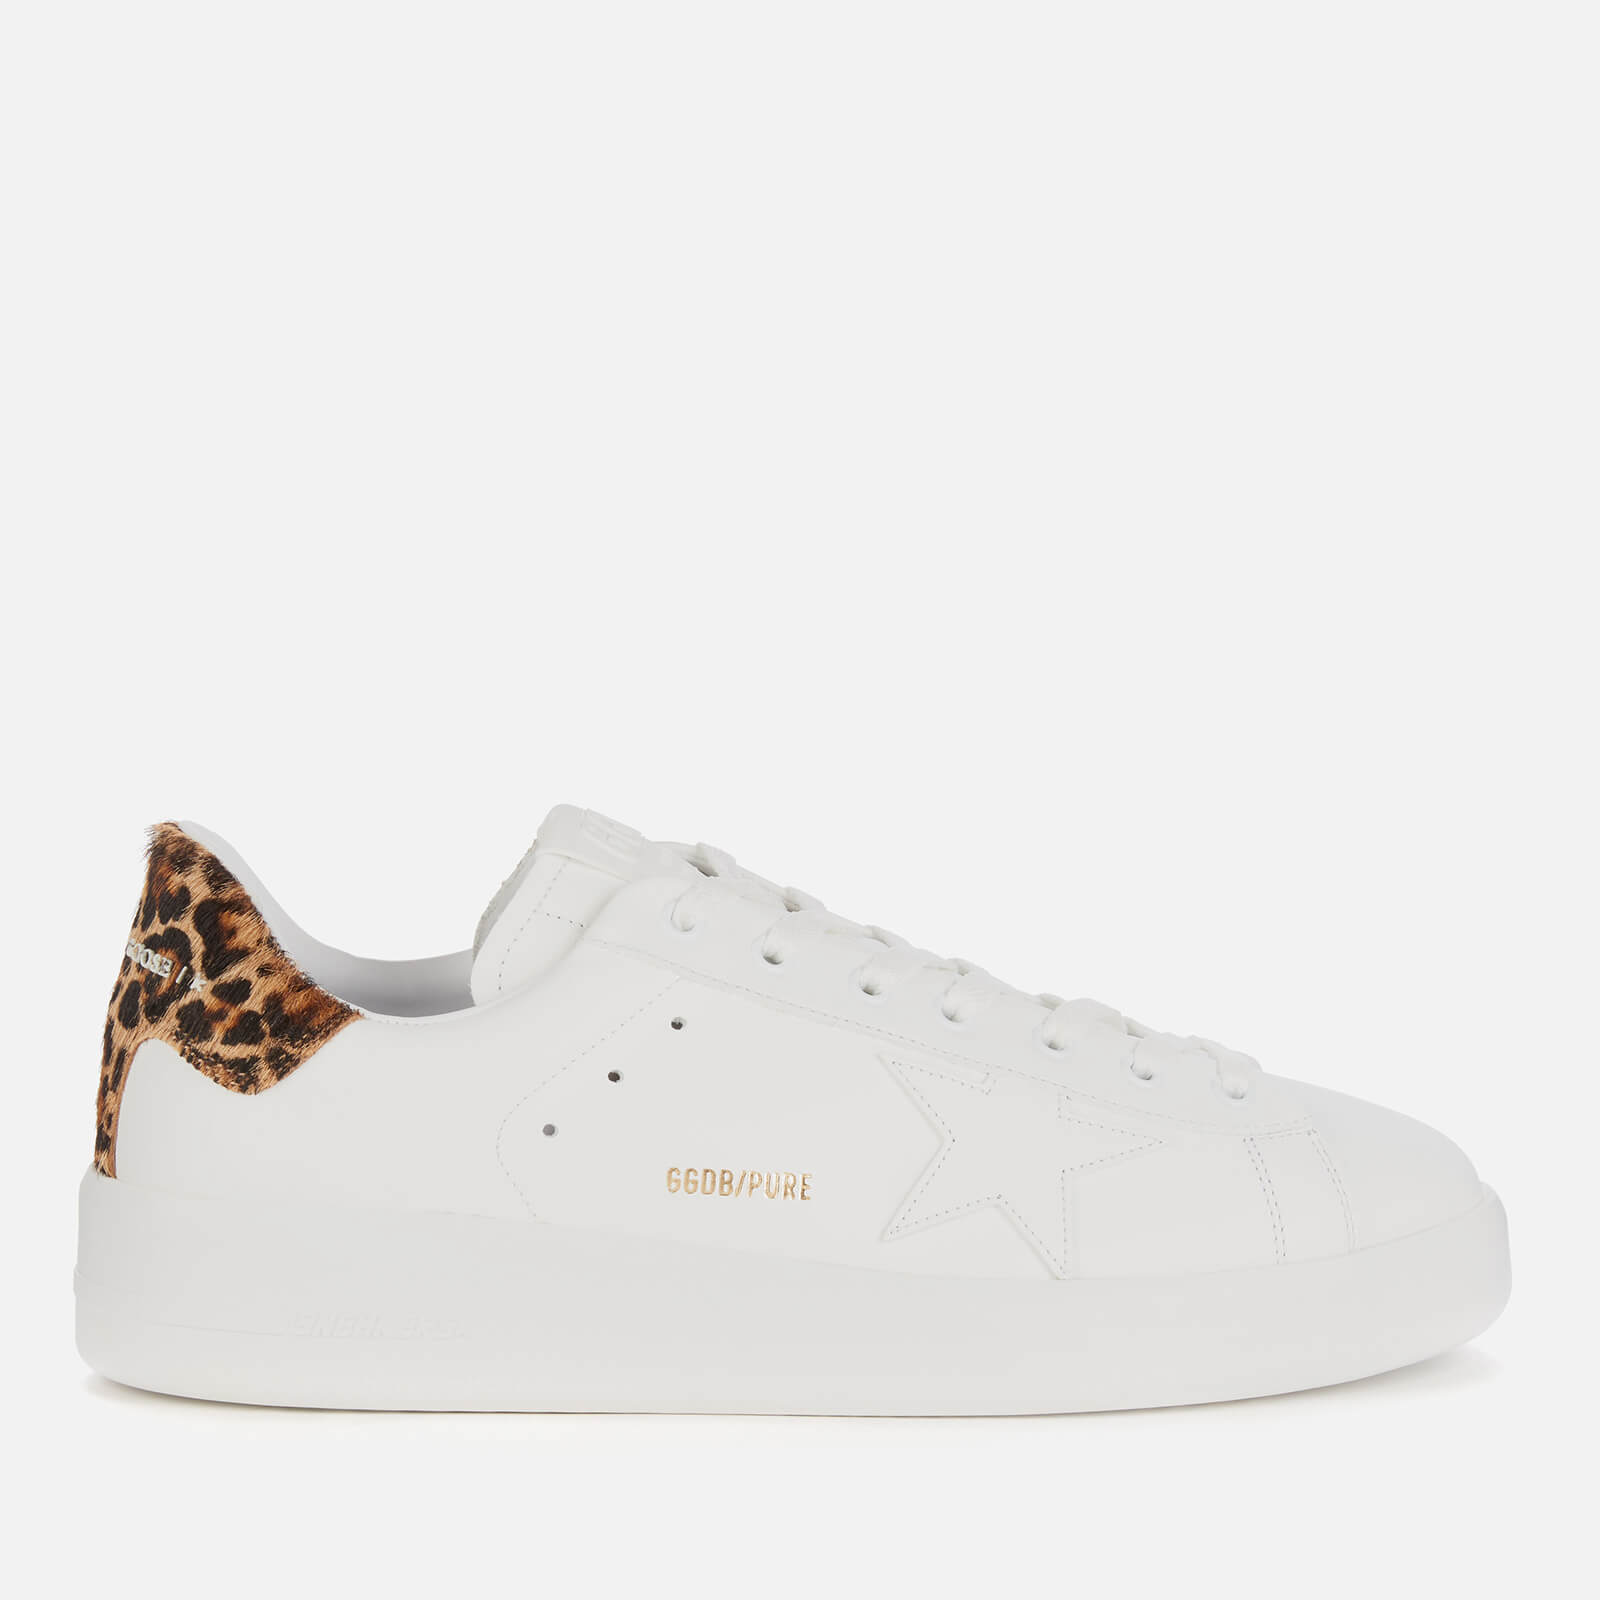 Golden Goose Deluxe Brand Men's Pure Star Leather Trainers - White/Brown Leopard - UK 8